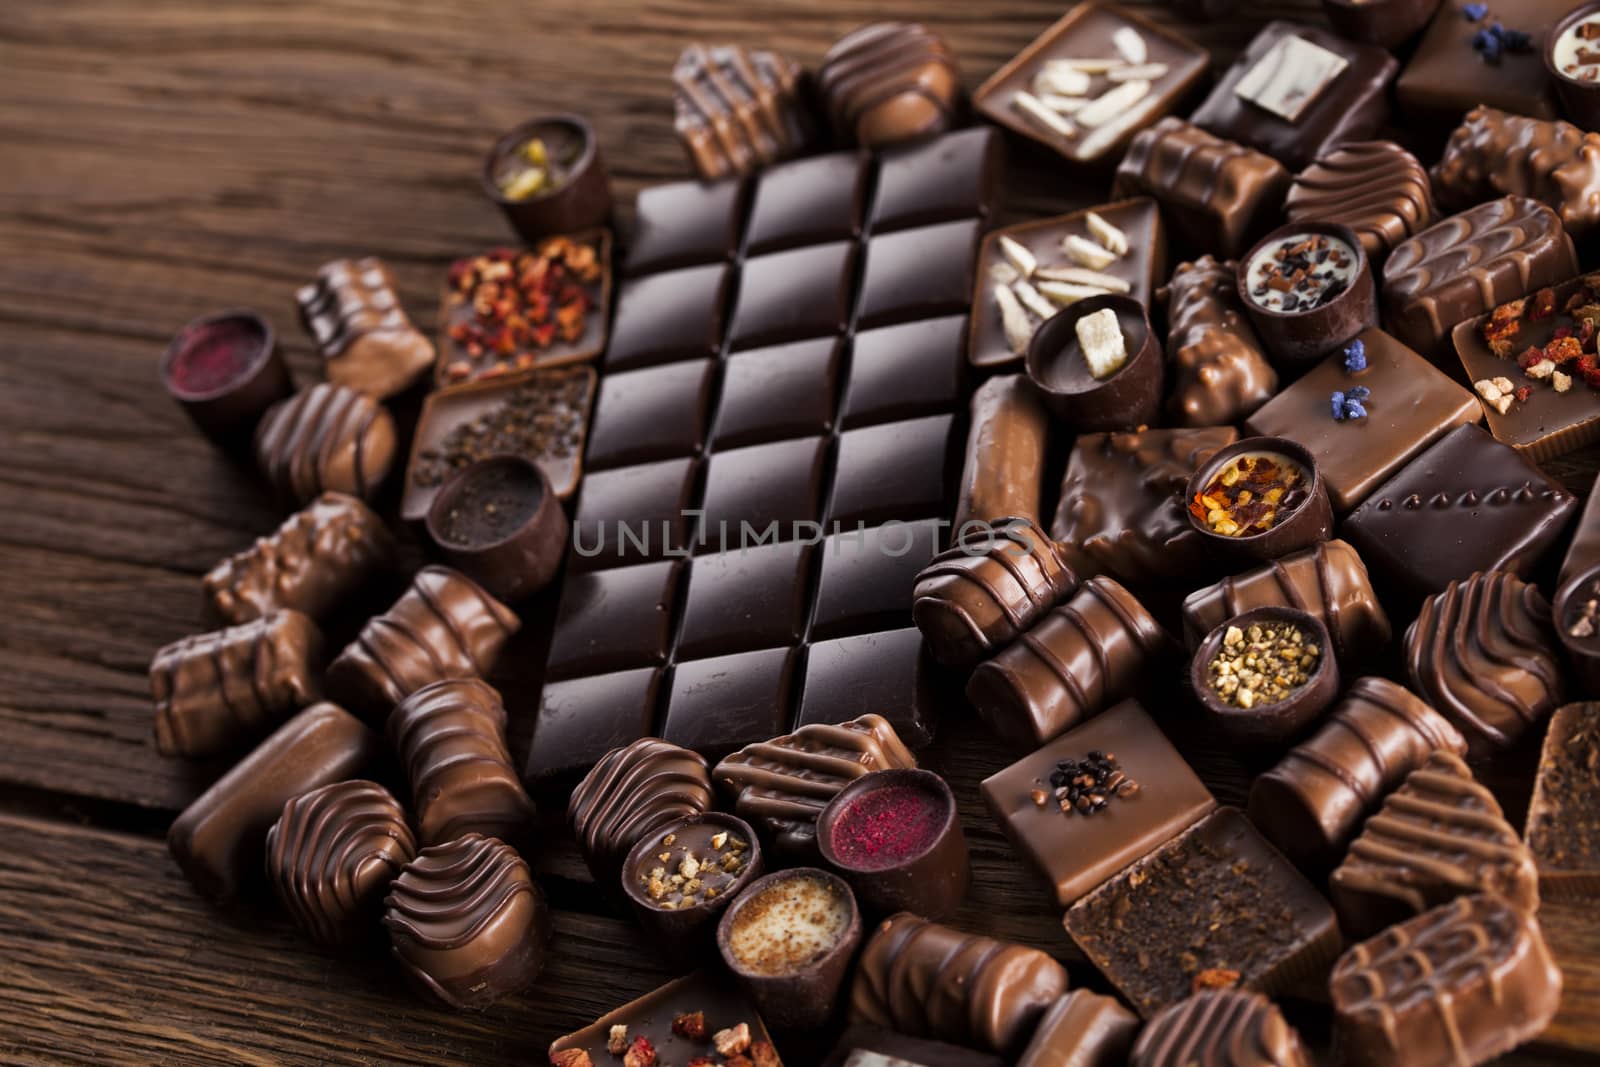 Chocolate bars and pralines on wooden background